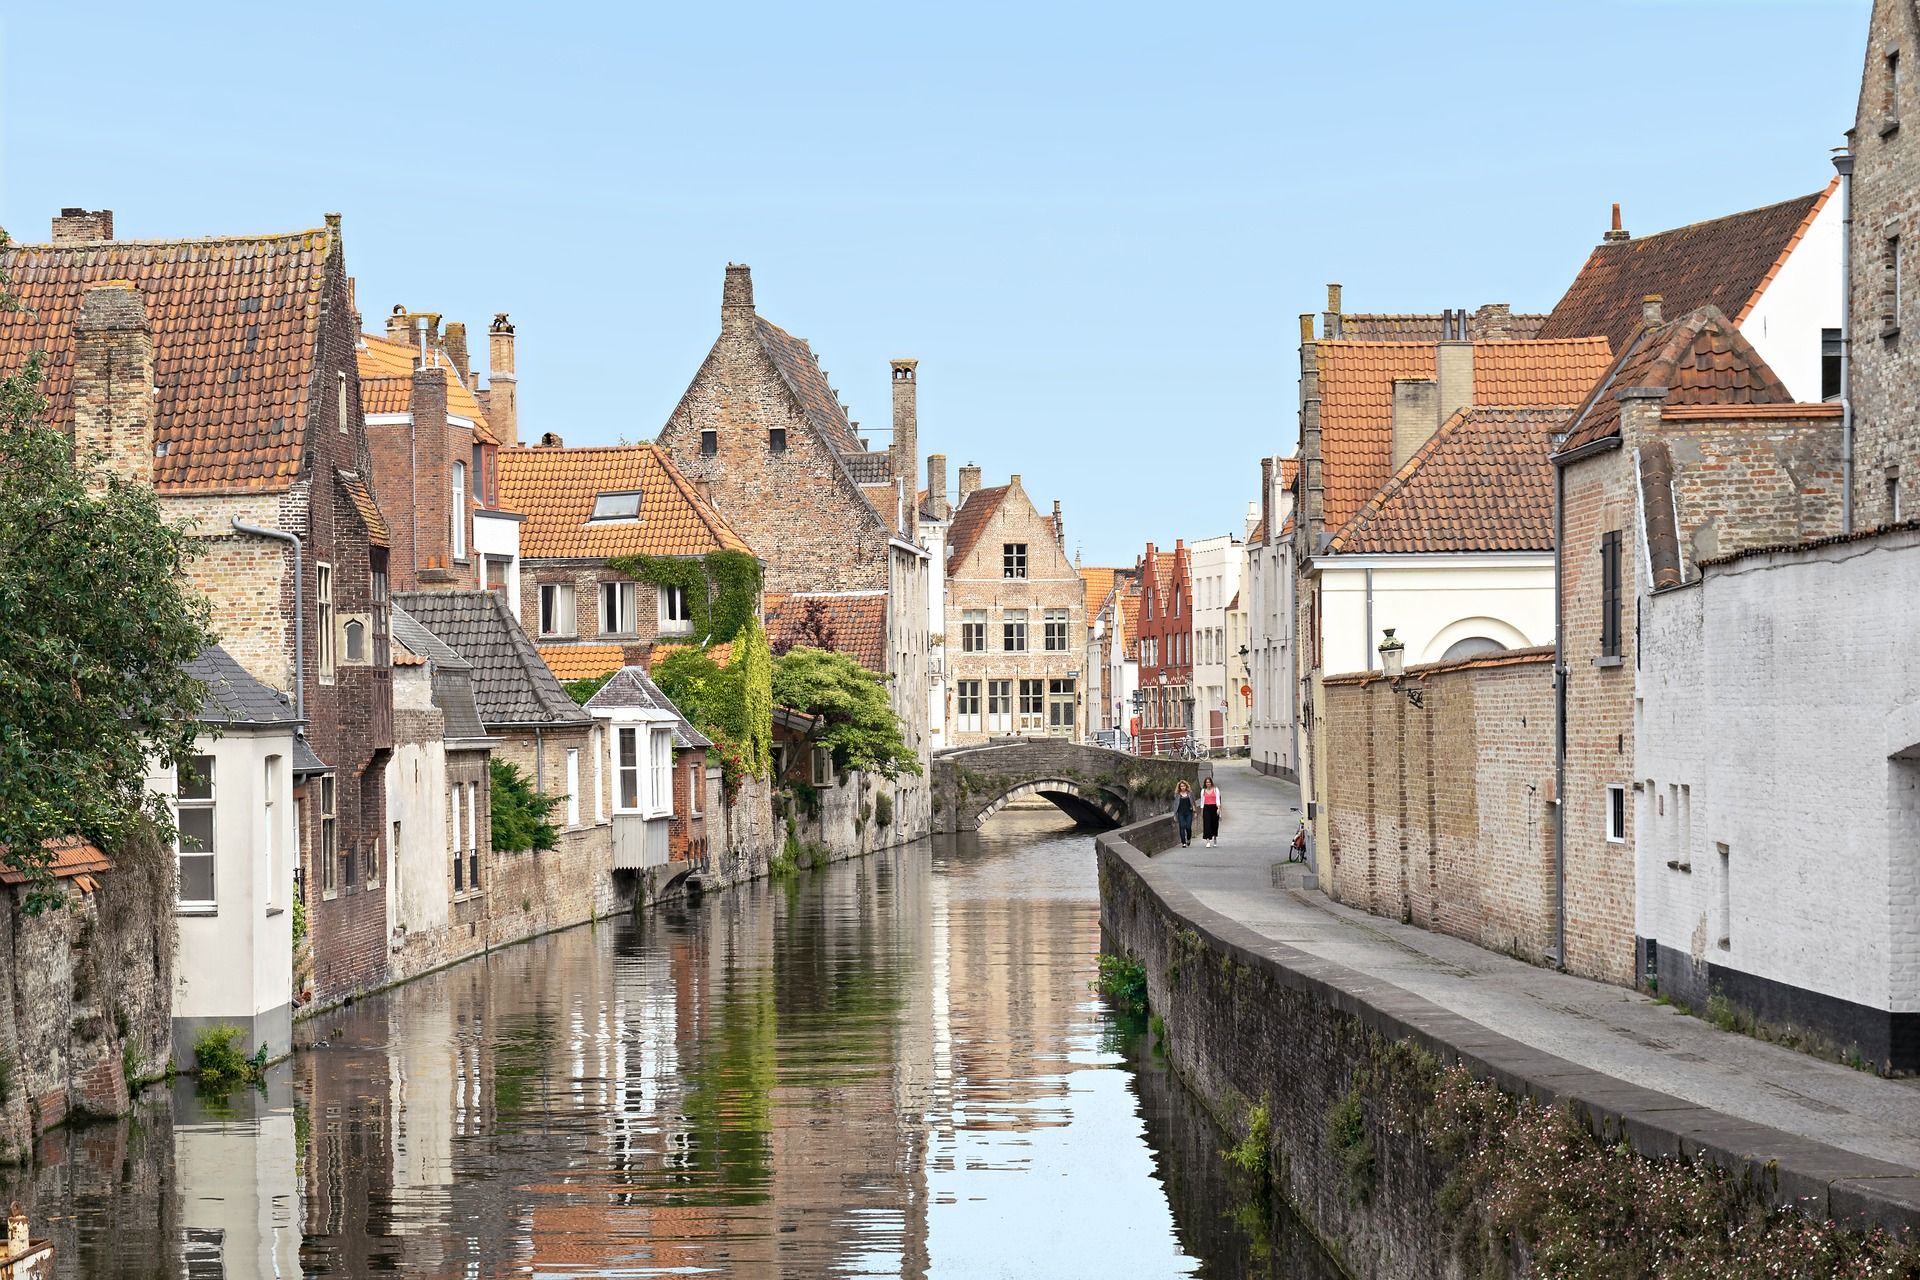 A canal in the city of Bruges, Belgium